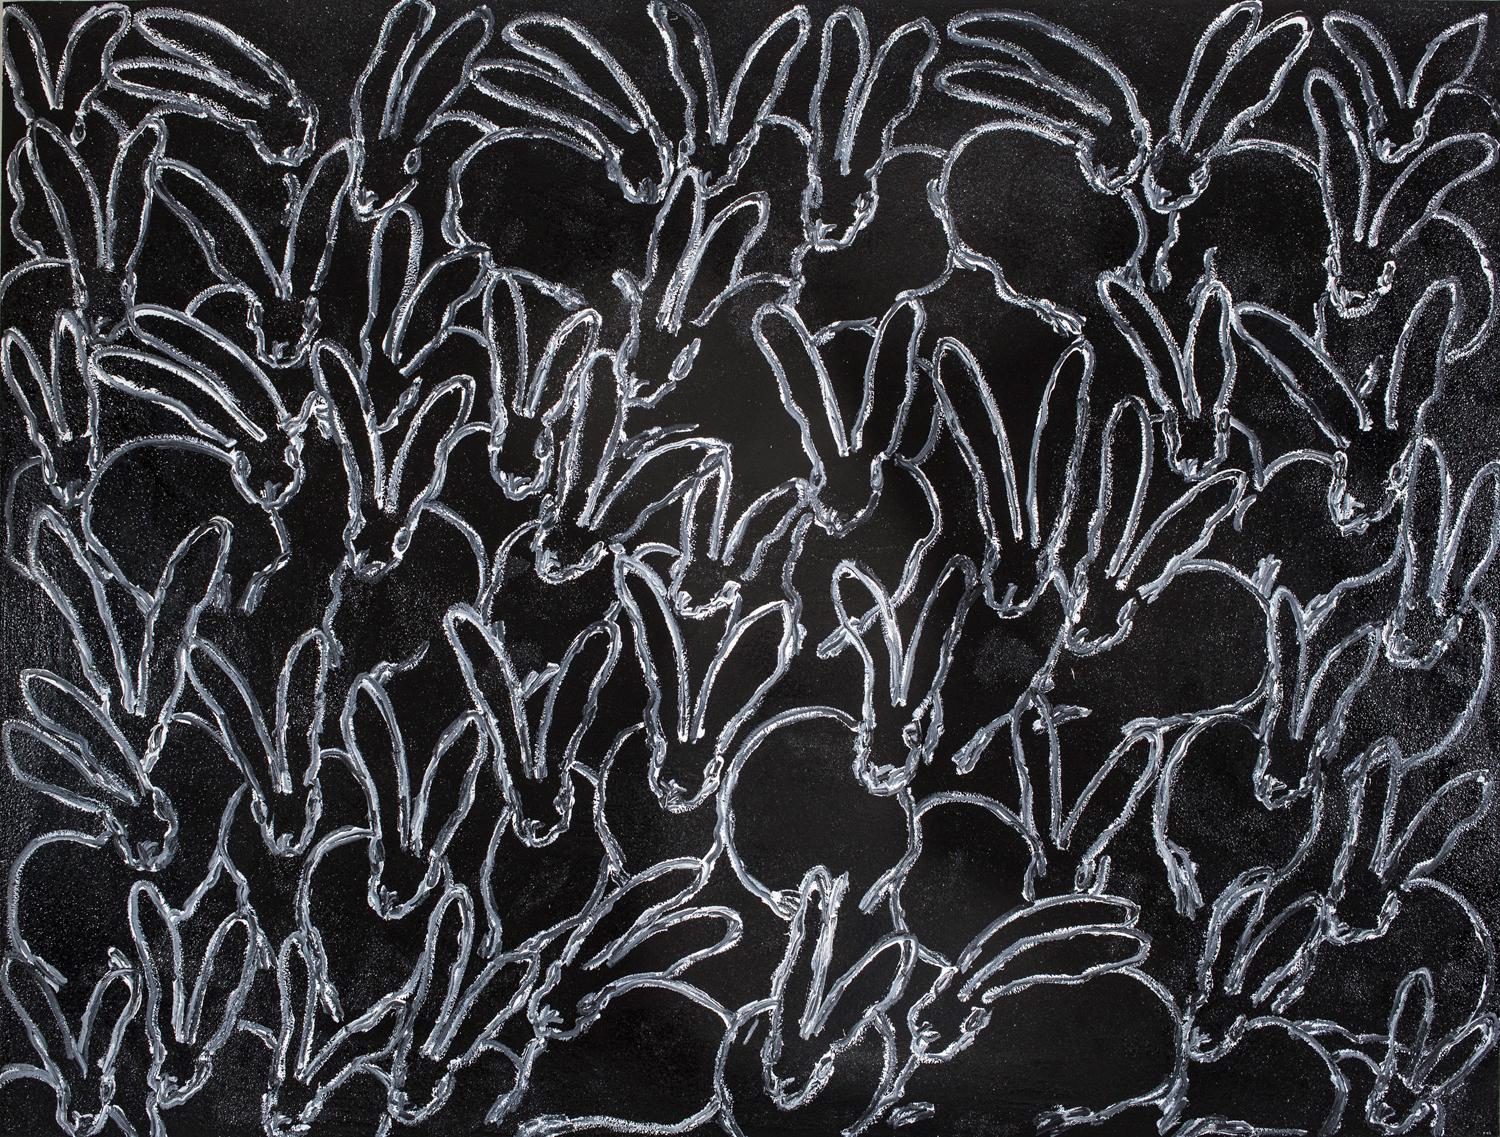 Hunt Slonem "Untitled" Bunnies
White bunnies on a black diamond dust background

Unframed: 77 x 101 inches

Hunt Slonem is a well-renowned American artist known for his neo-expressionist paintings of butterflies, rabbits, and tropical birds. The